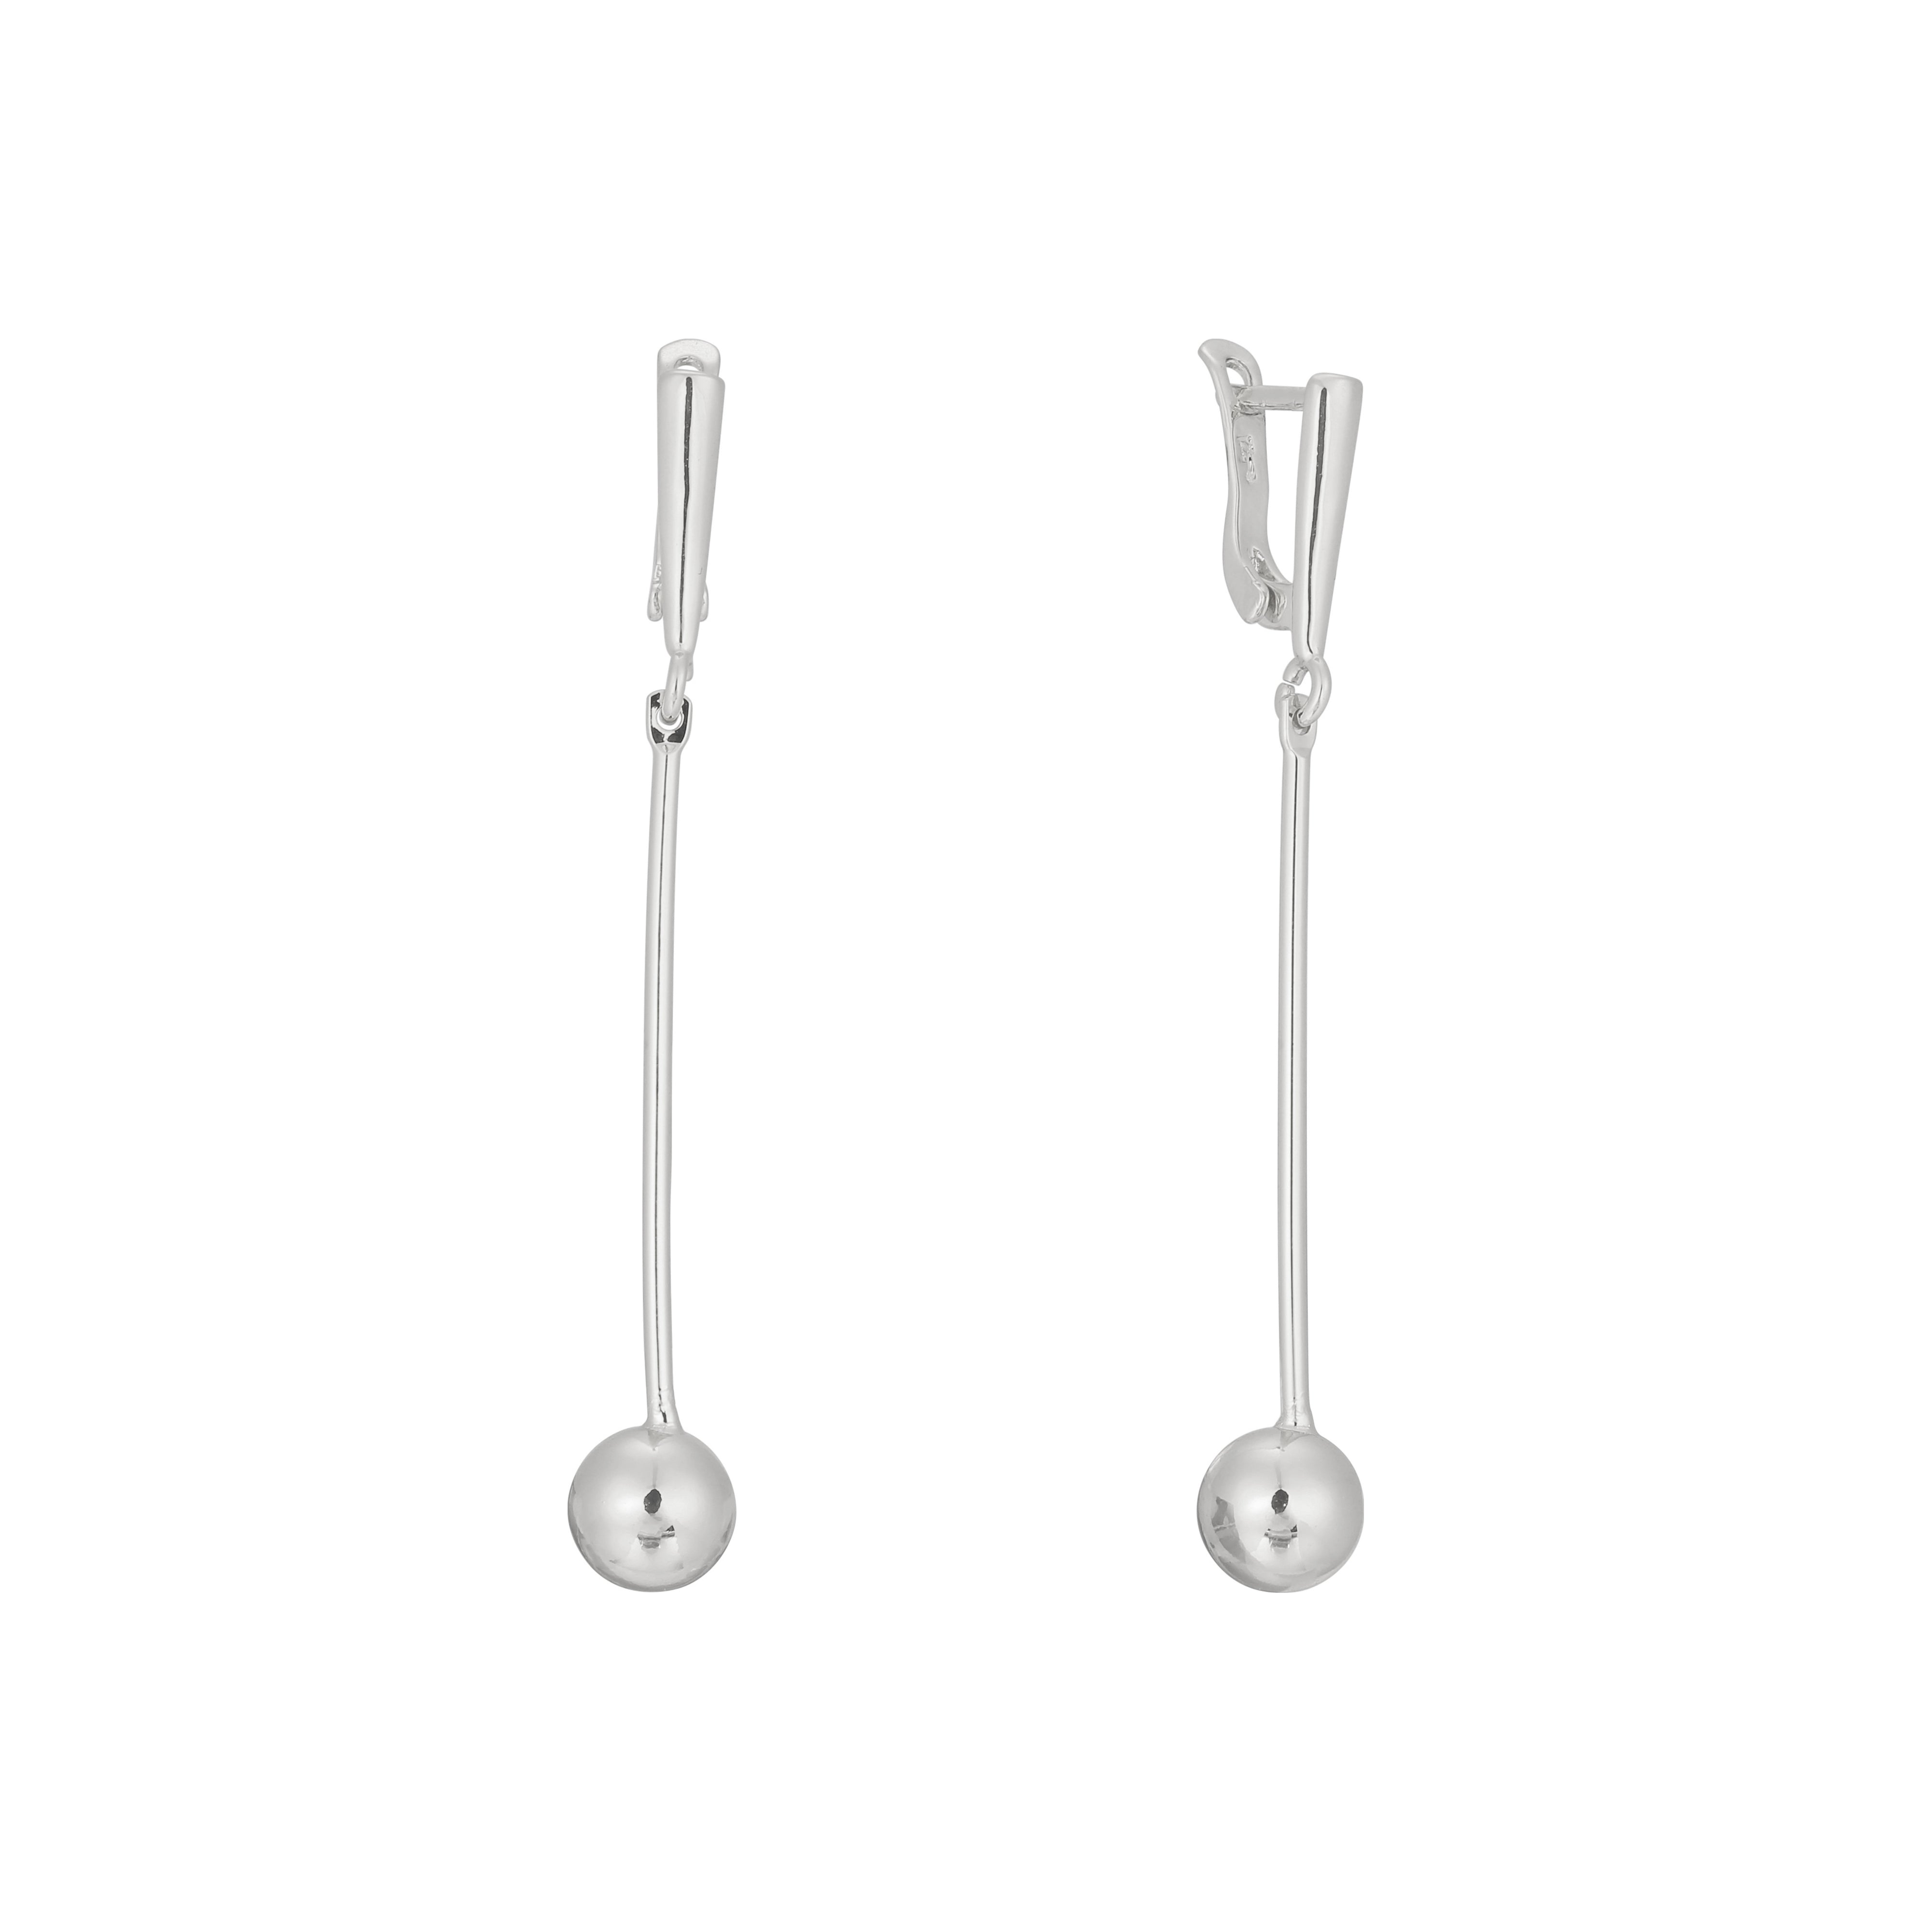 .Olivia's Beads - Beads long drop earrings in 14K Gold, White Gold, Rose Gold plating colors